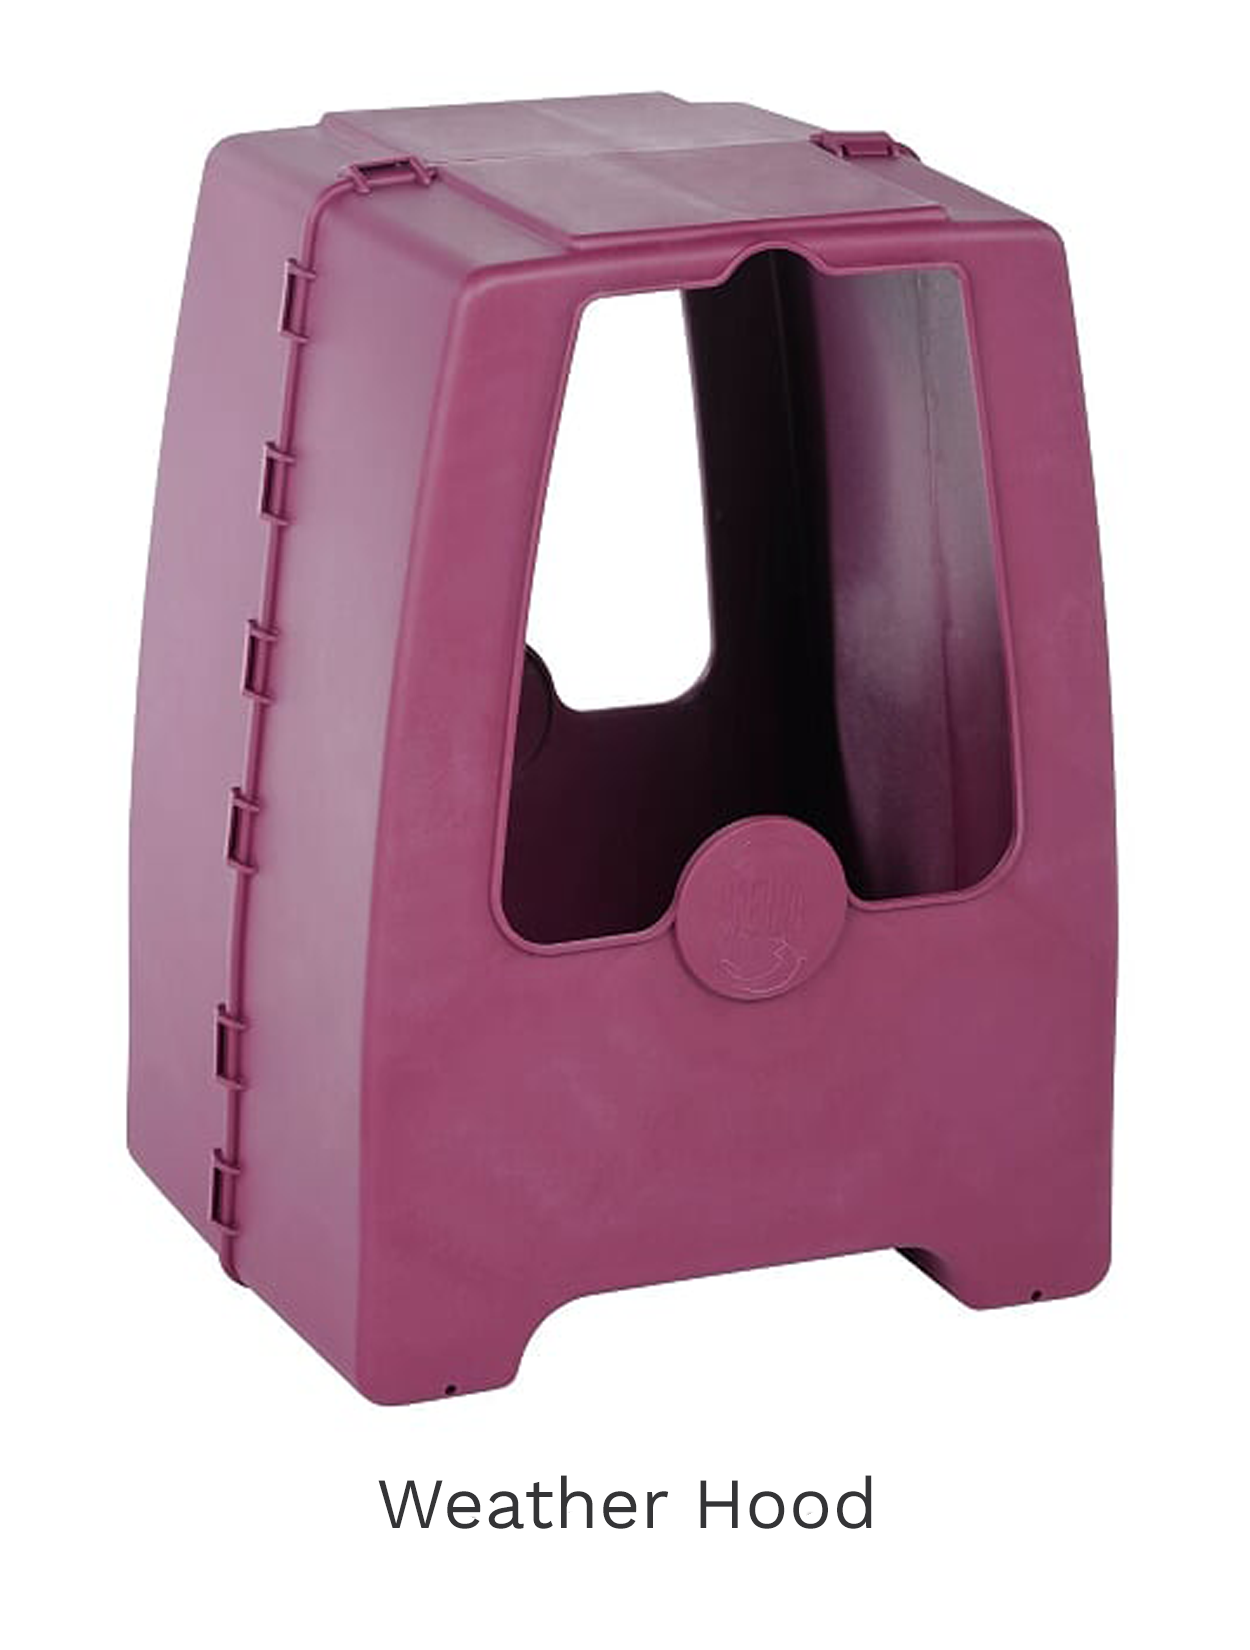 All weather protective fume extraction hood for Plastec Polypropylene Blower